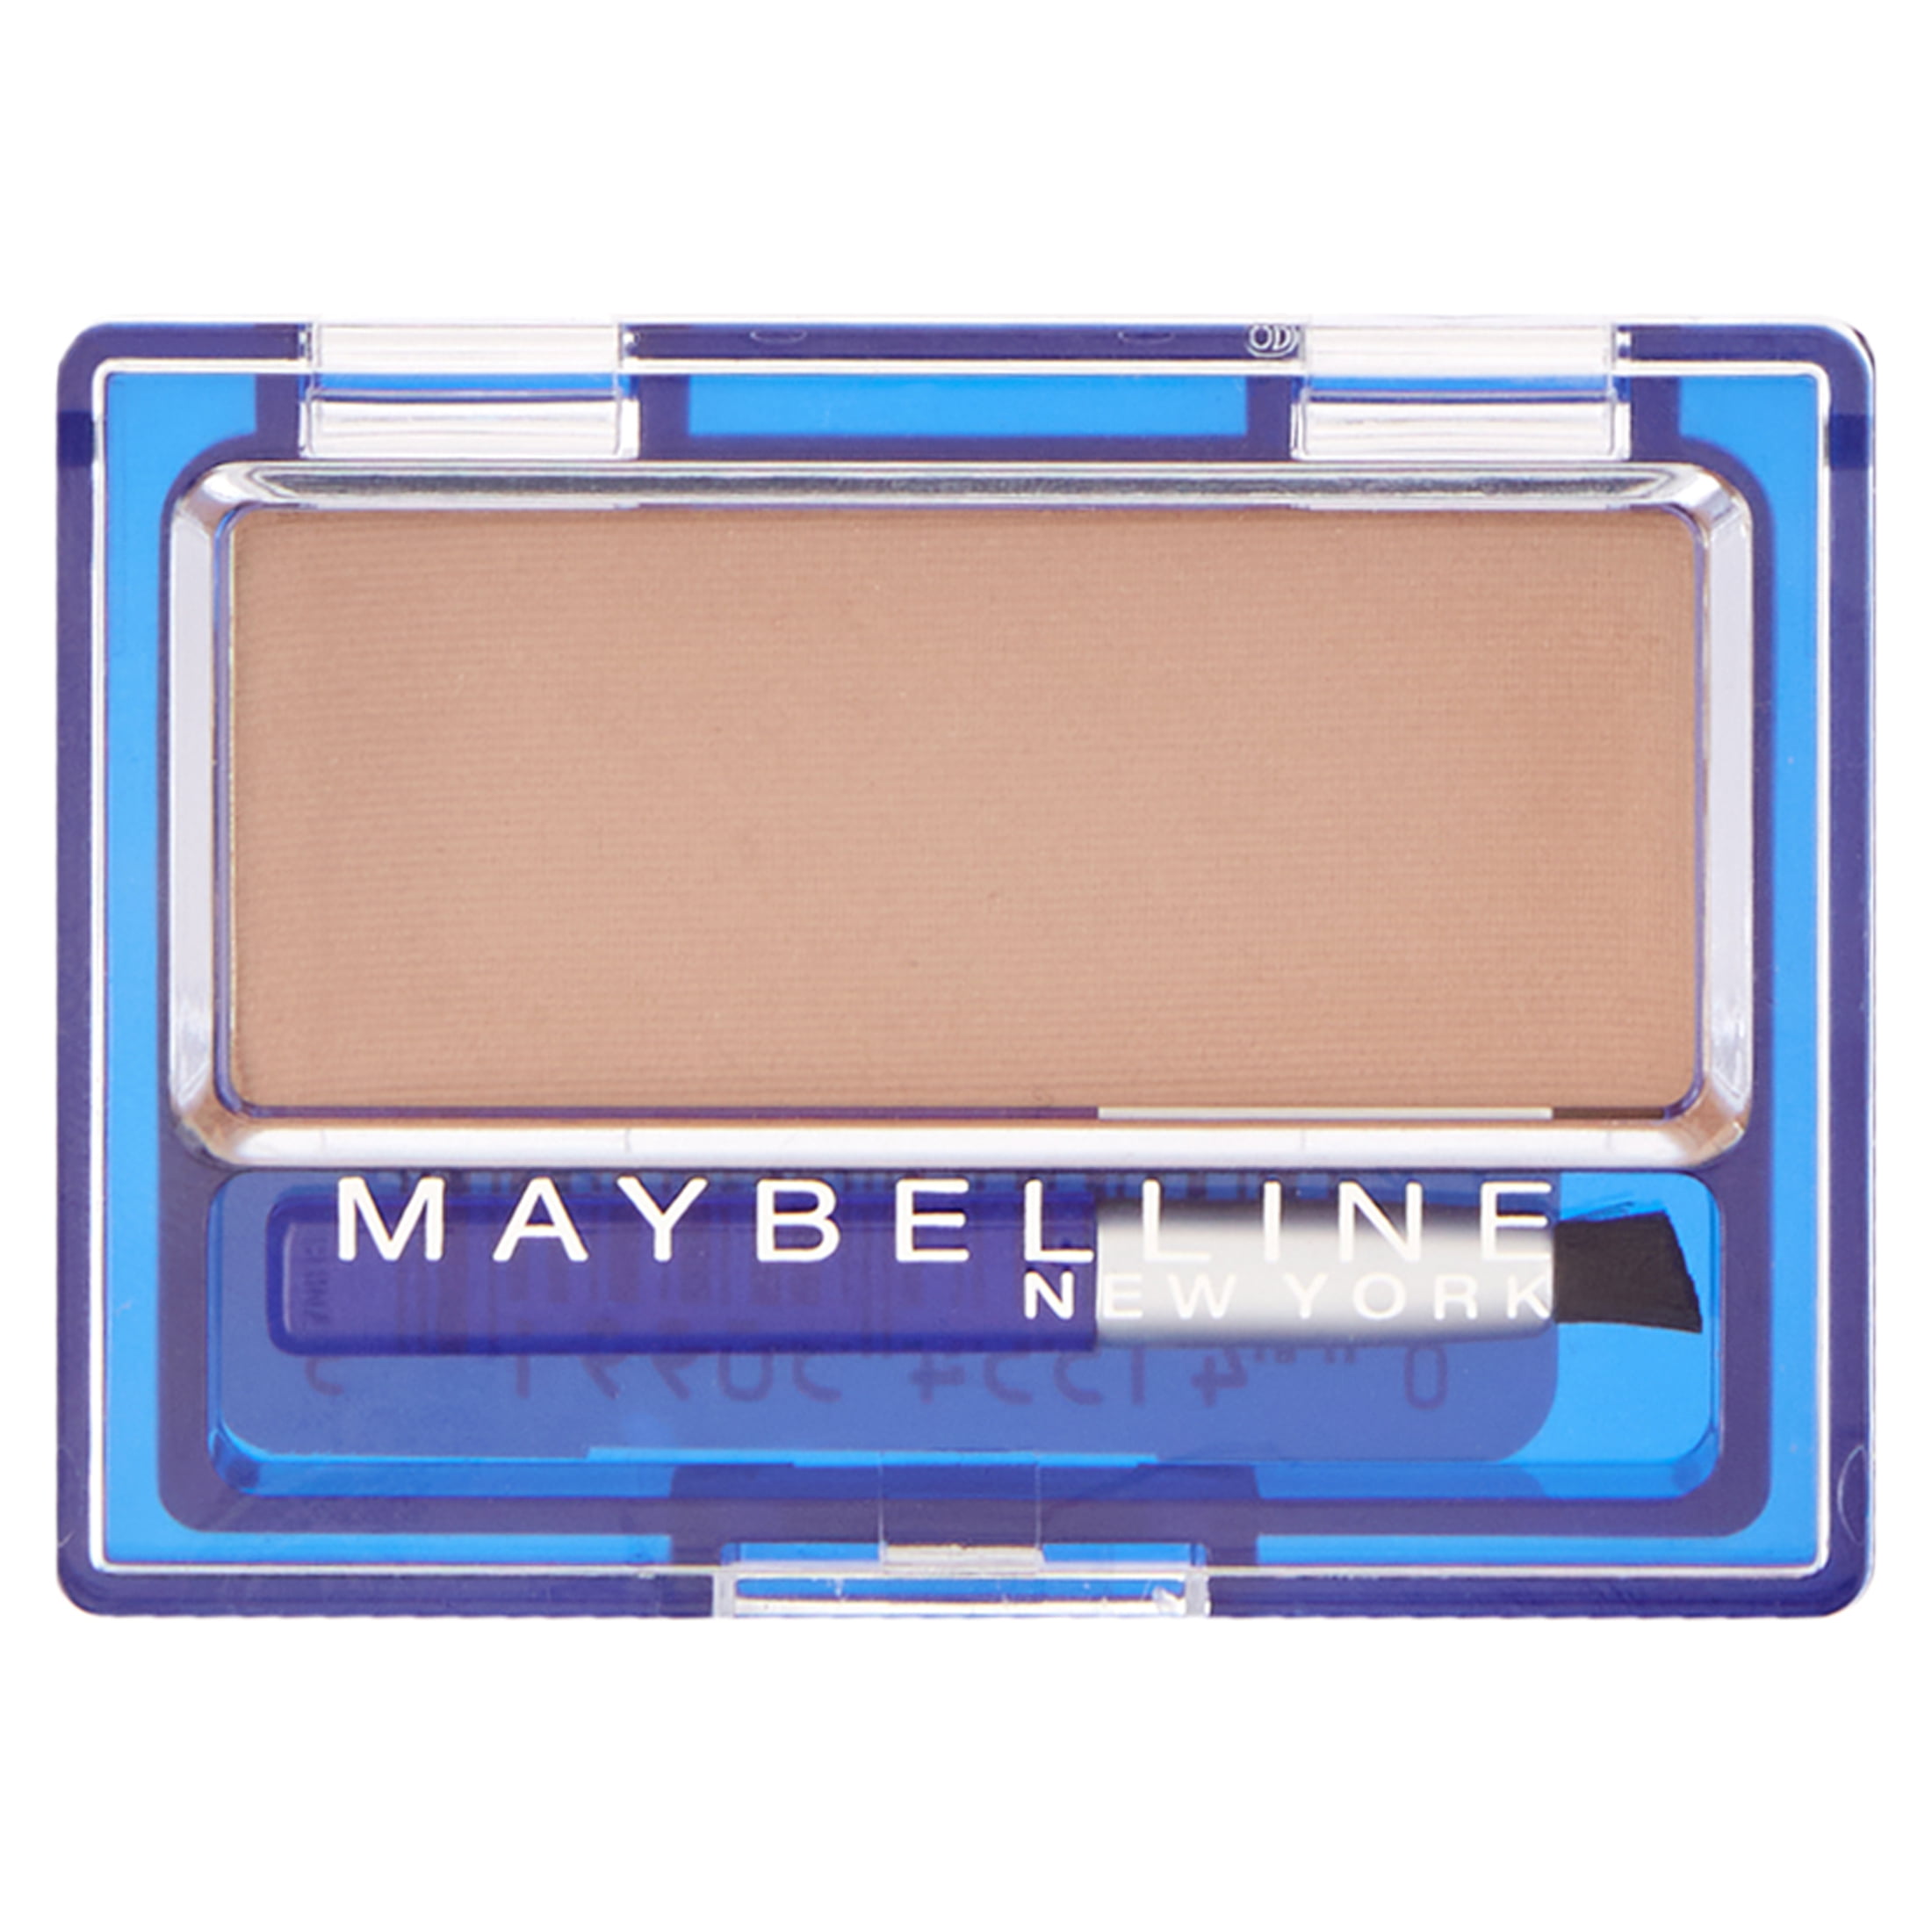 Maybelline New York Ultra Brow Brush On Color, Light Brown - image 4 of 7